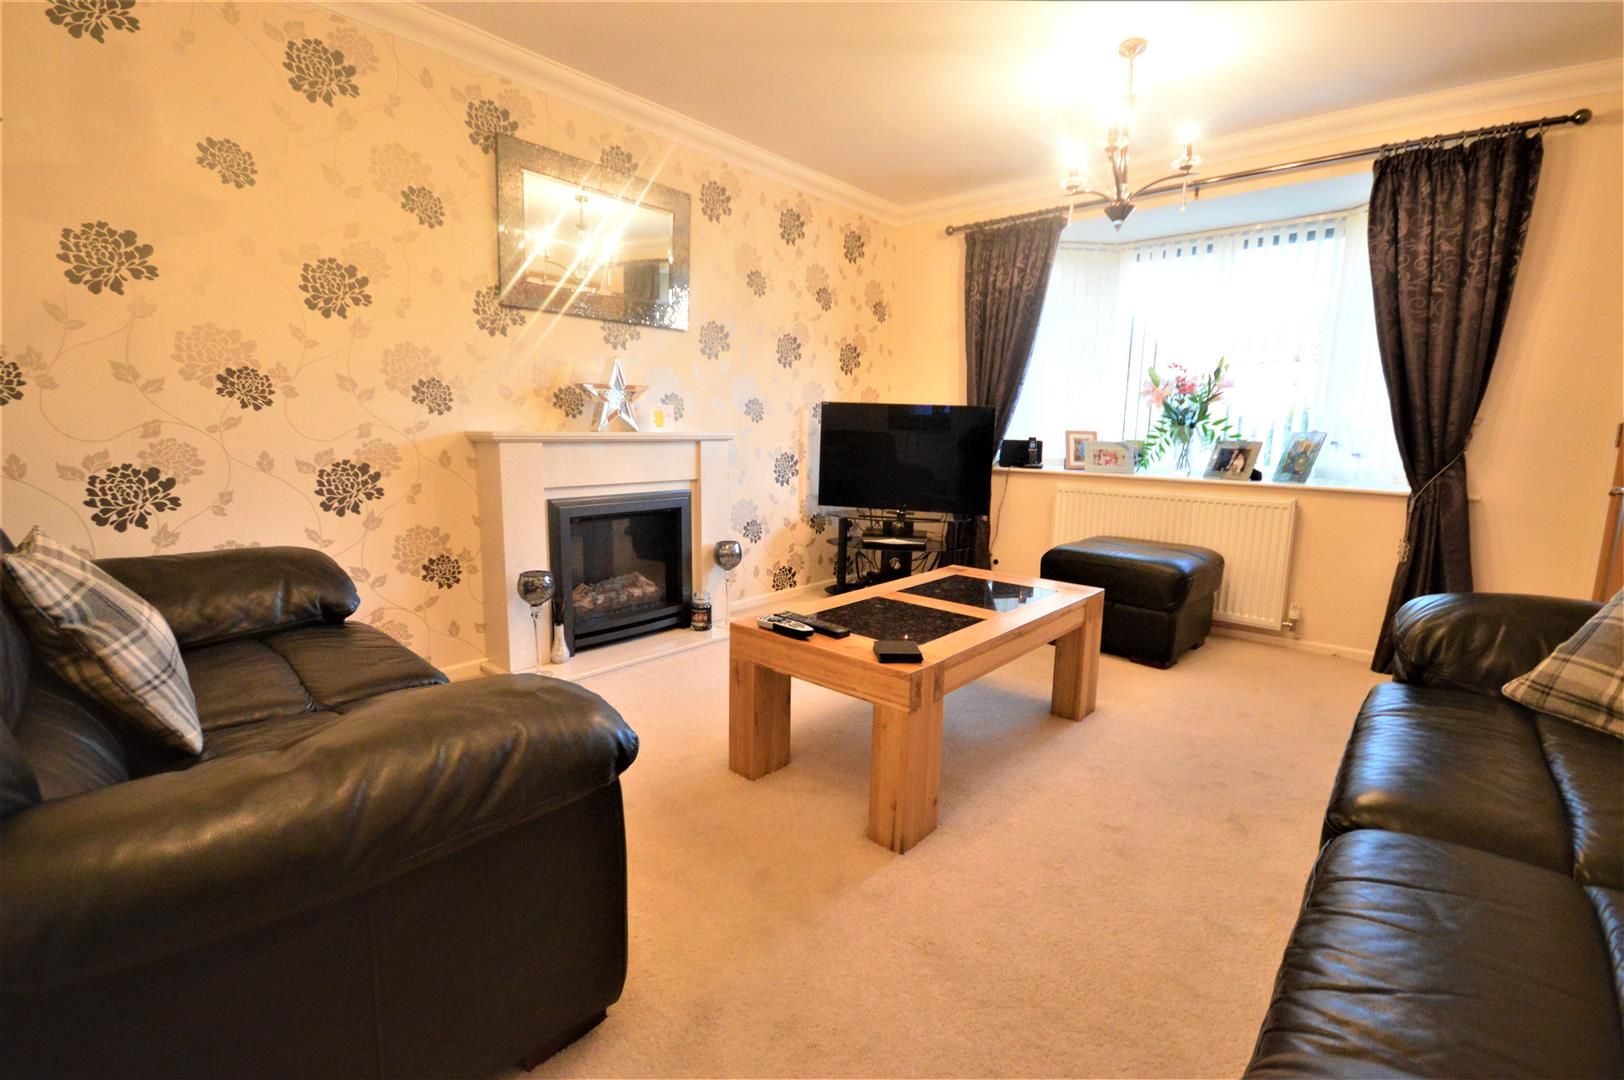 3 bed semi-detached for sale in Leominster 2